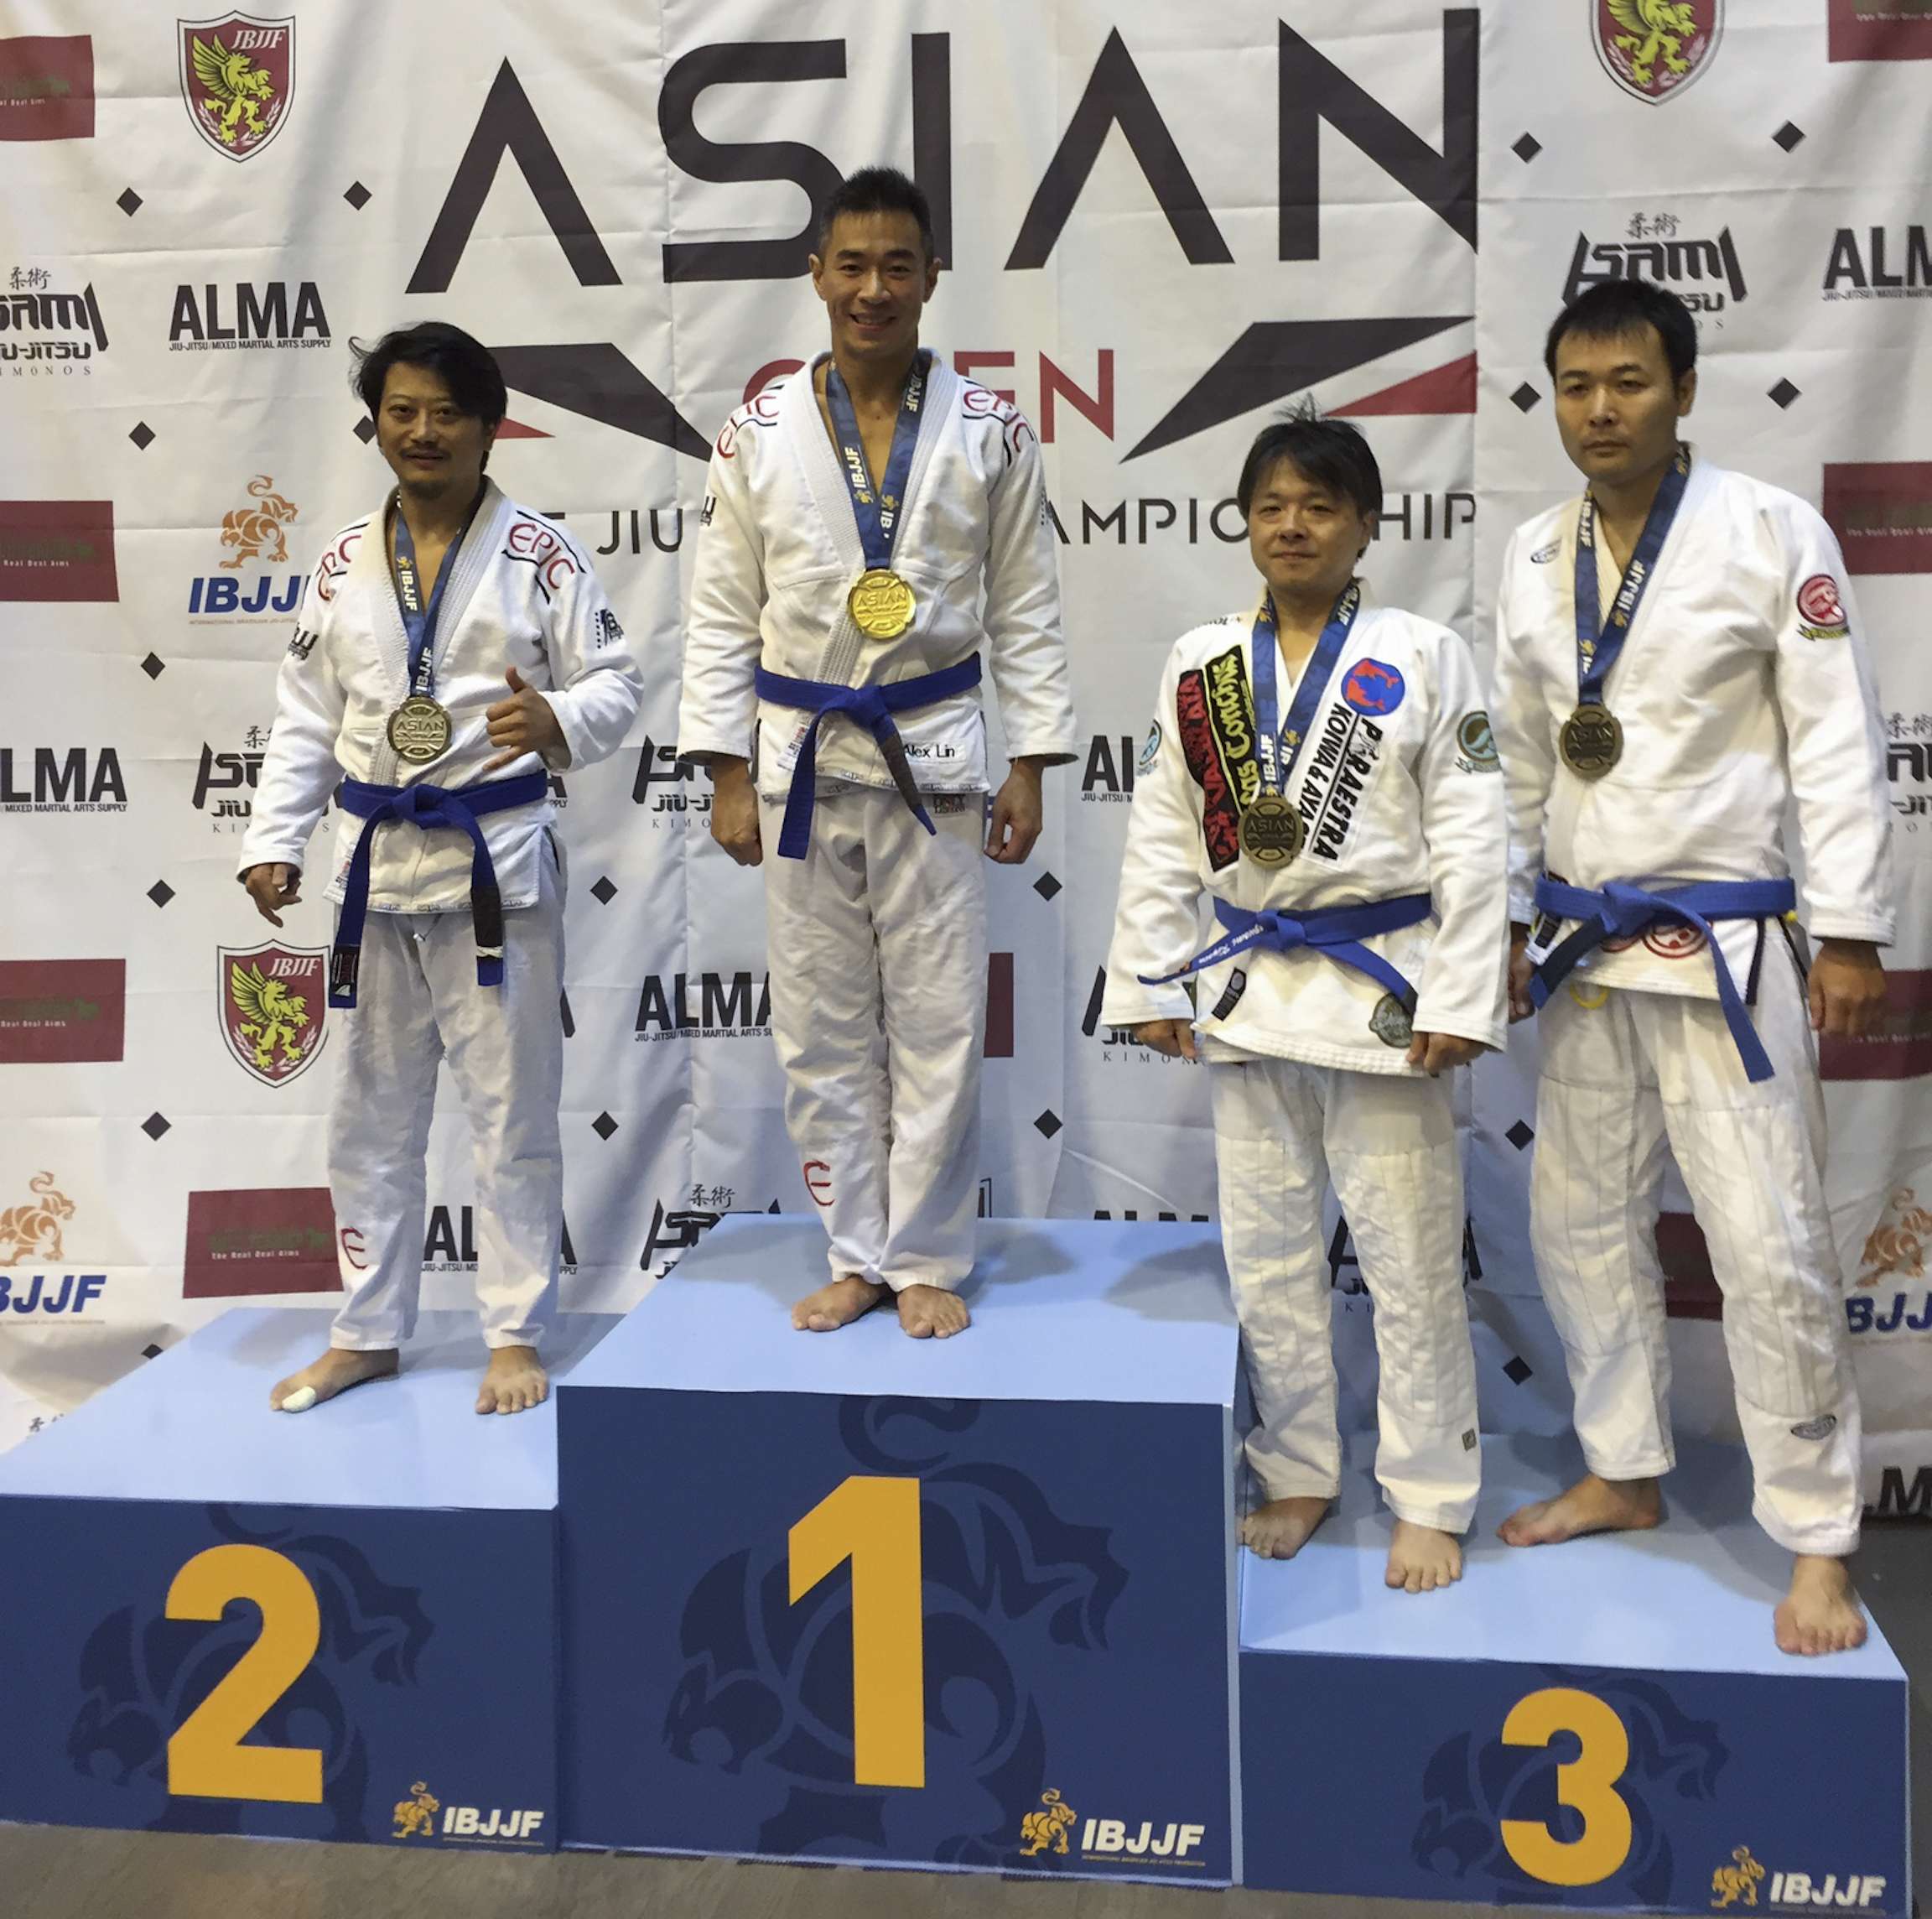 Alex Lin (second from left) on the podium at the IBJJF Asian Open Tokyo in 2015.